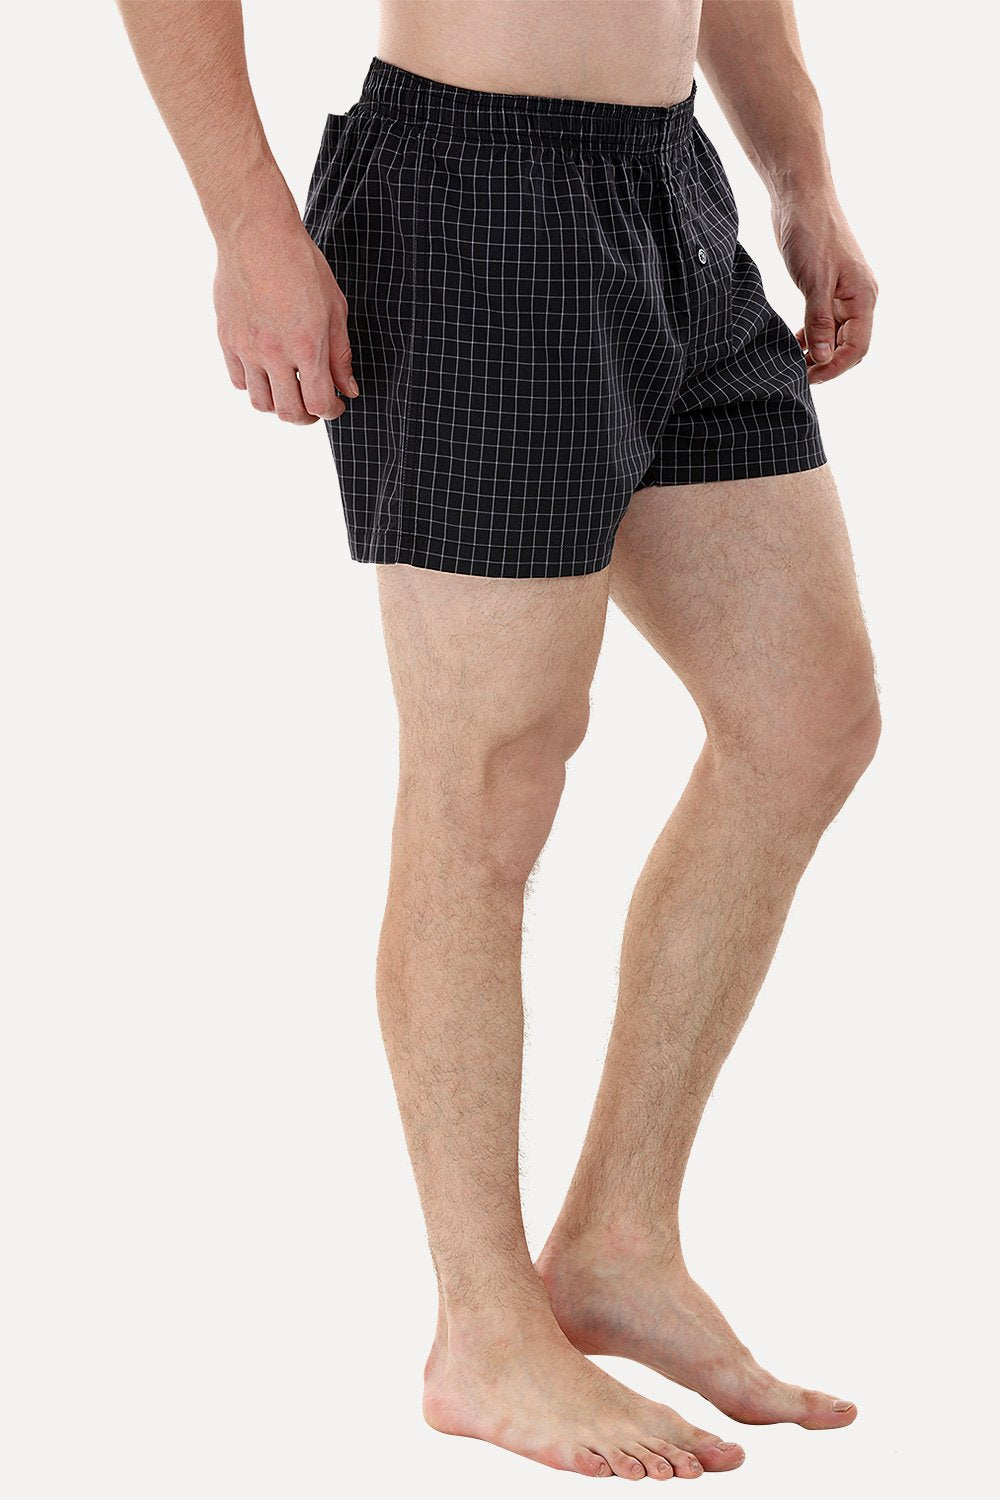 Buy Online Woven Black Check Boxer Shorts for Men Online in India at ...